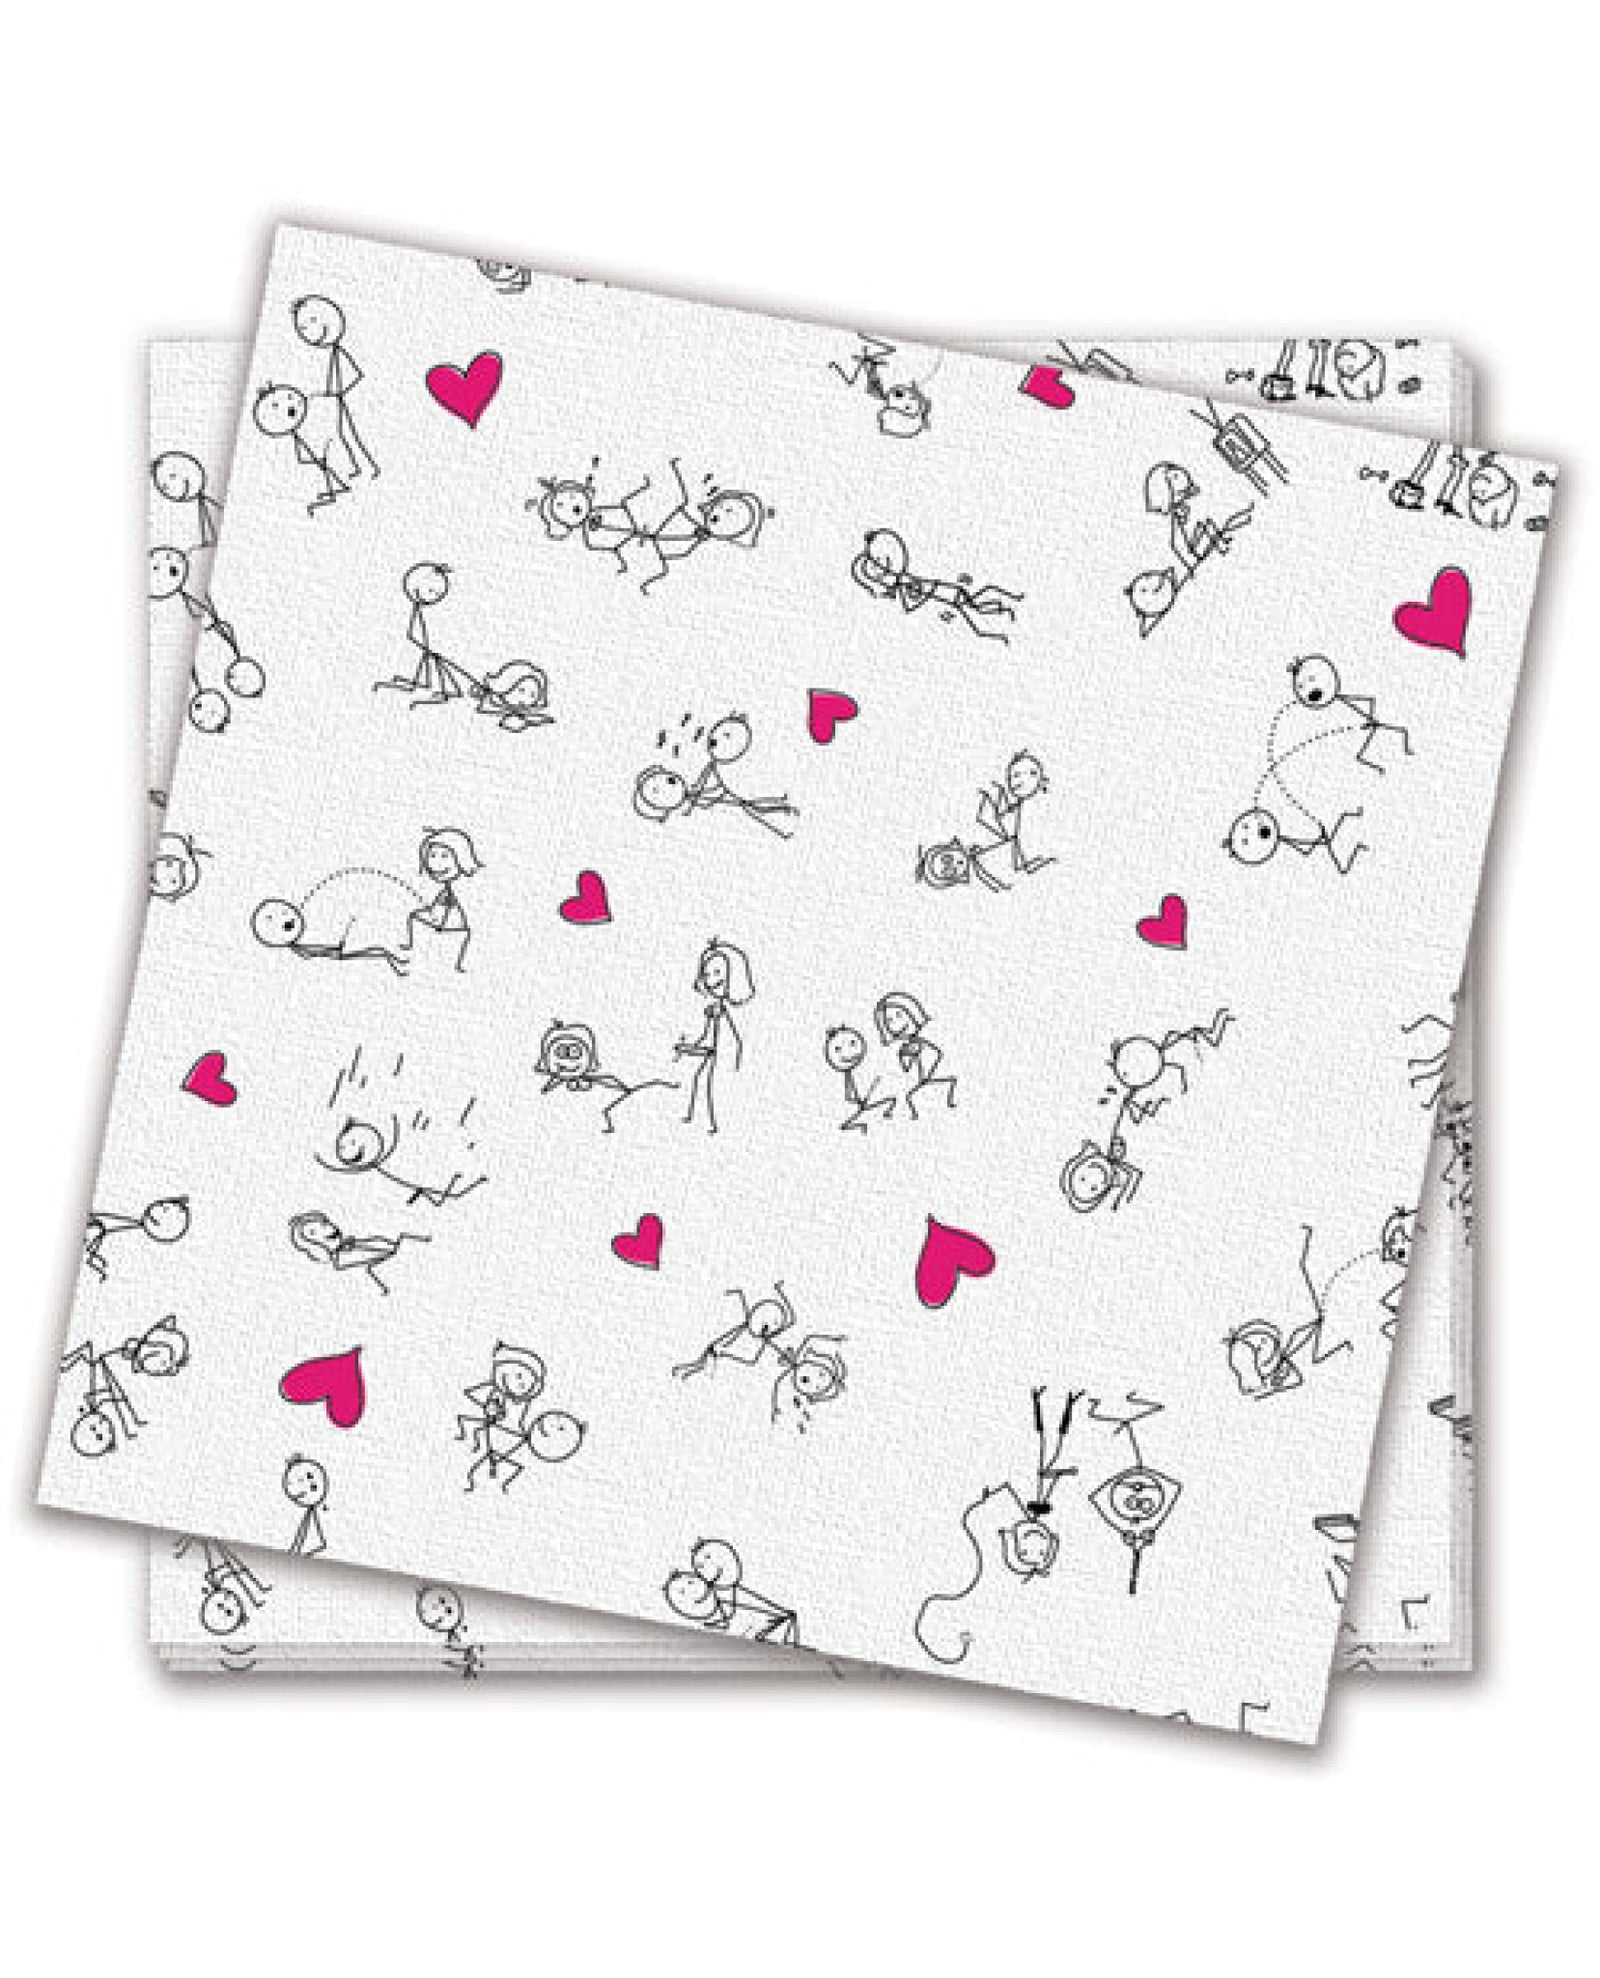 Dirty Dishes Posistion Napkins - Bag Of 8 Little Genie